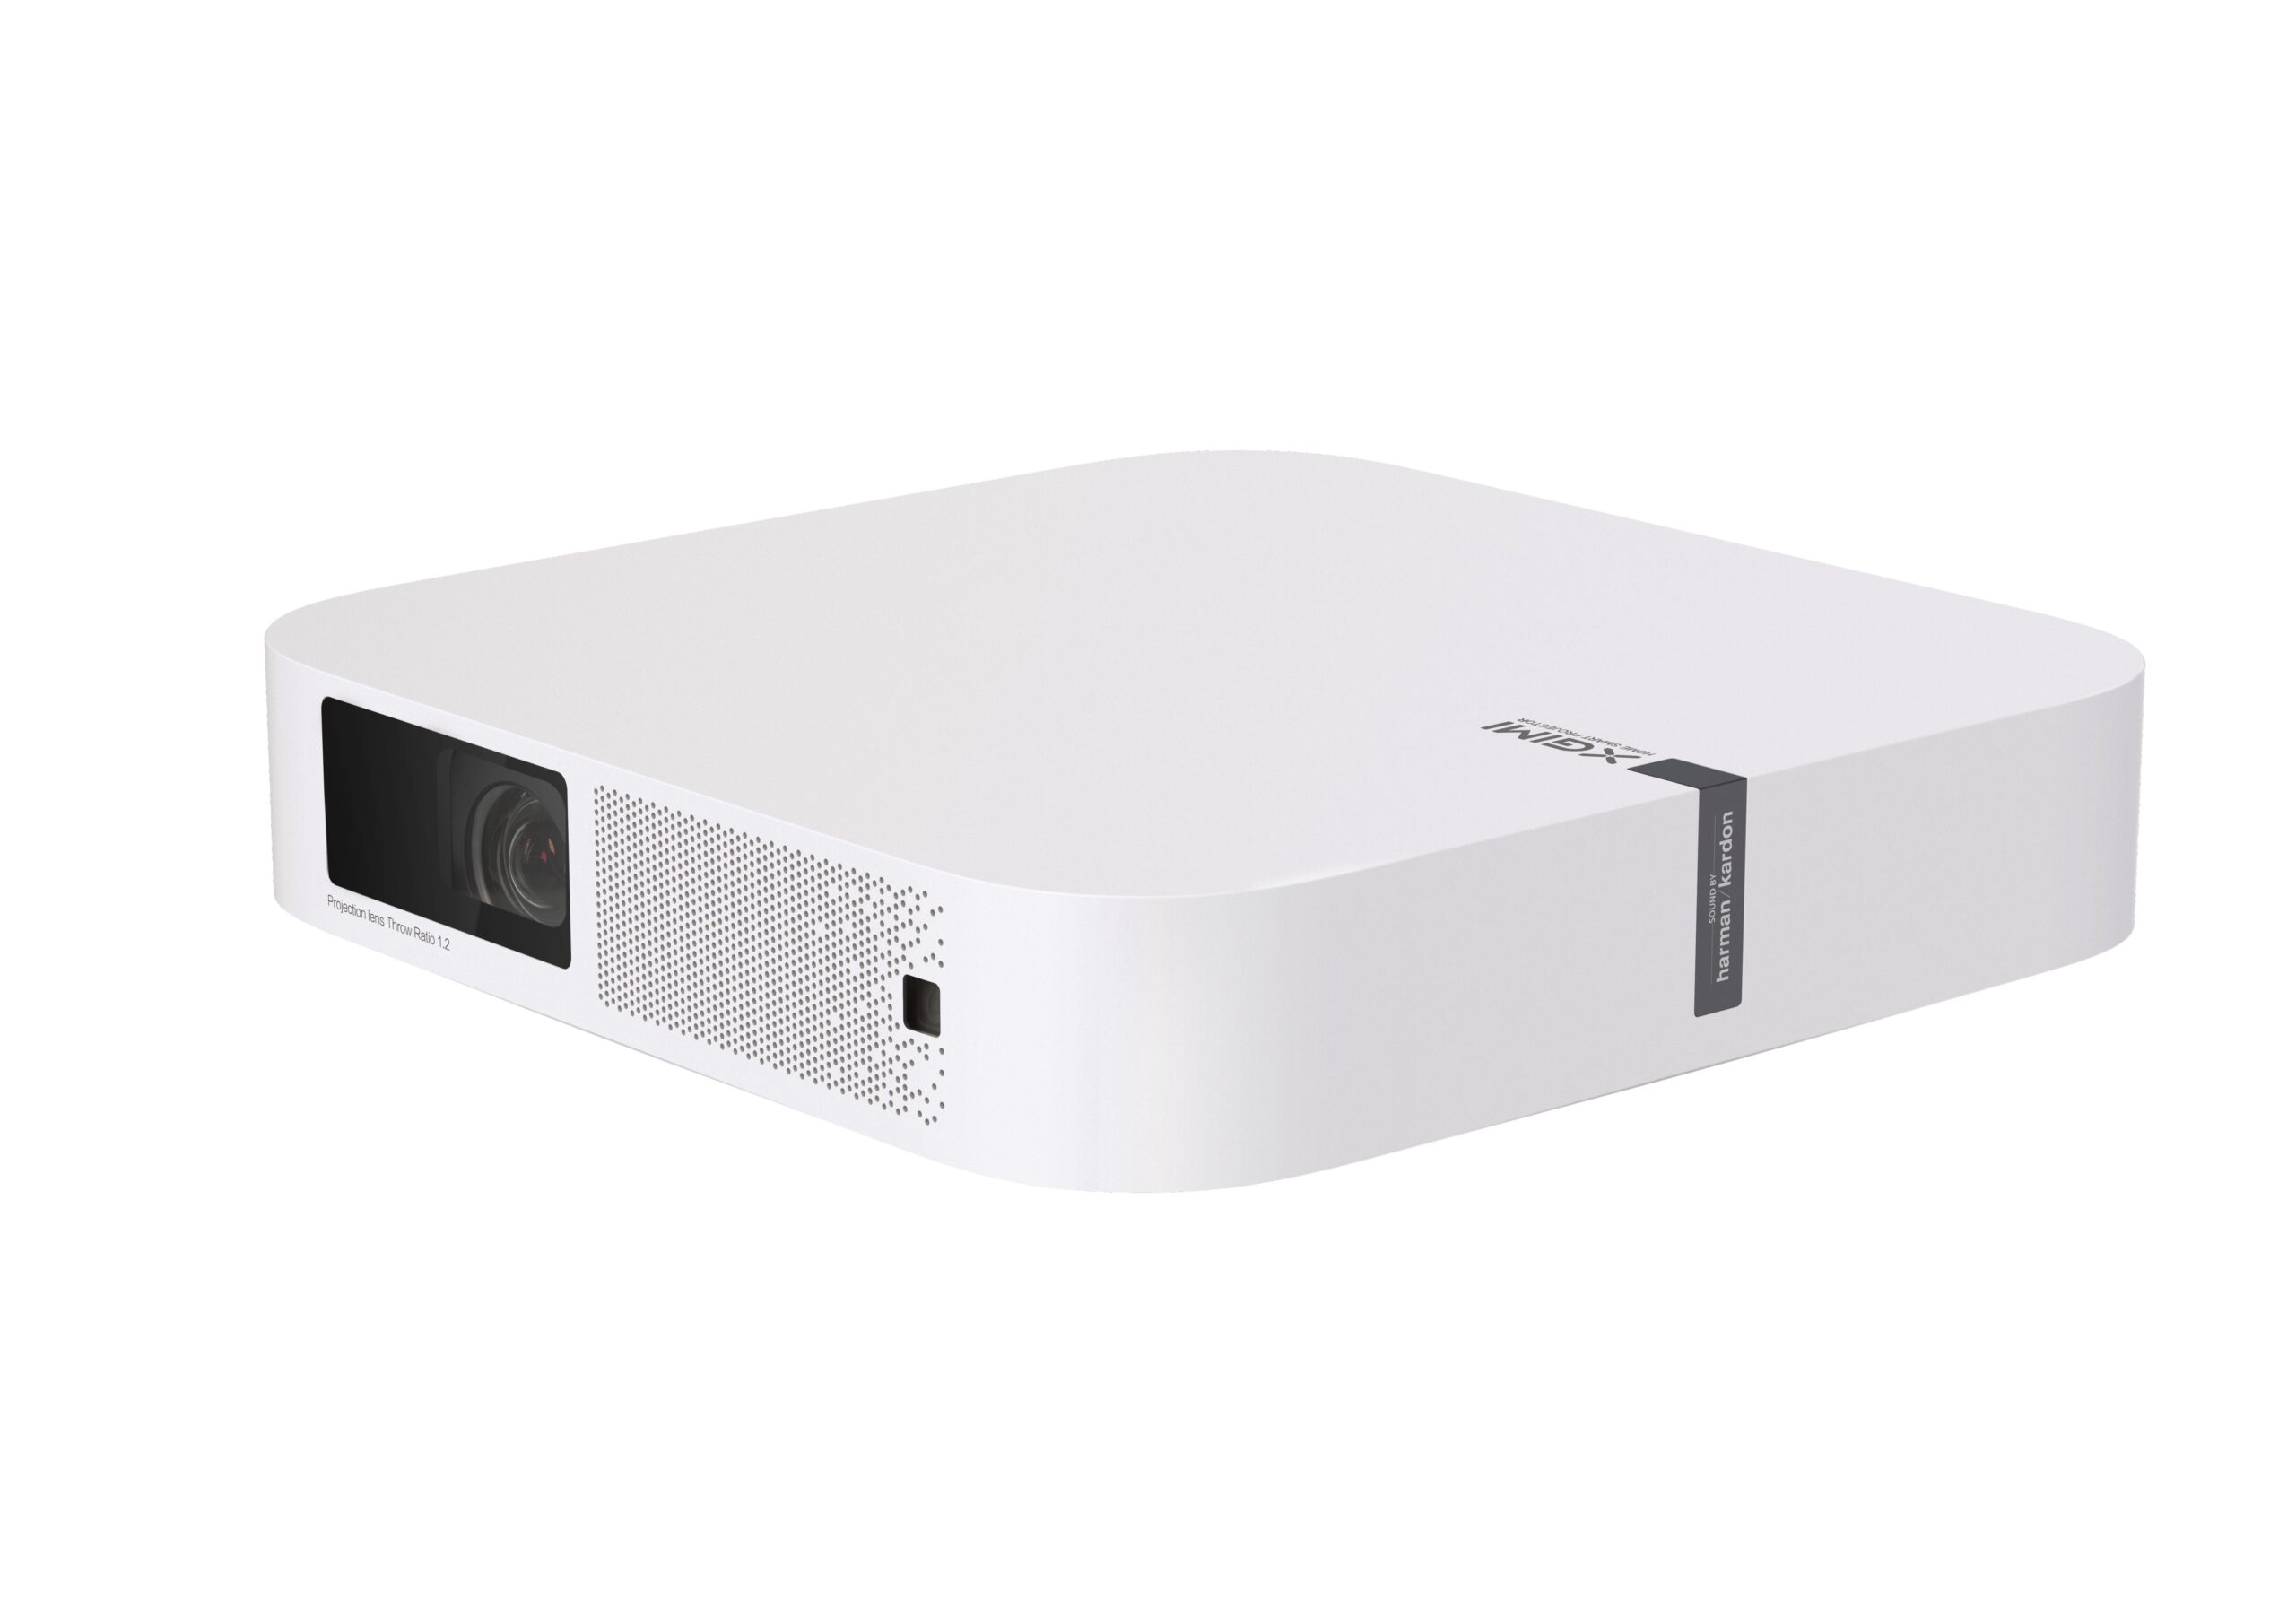 XGIMI launches ‘Elfin’, an award profitable, super sleek projector aimed at discerning festive shoppers in India